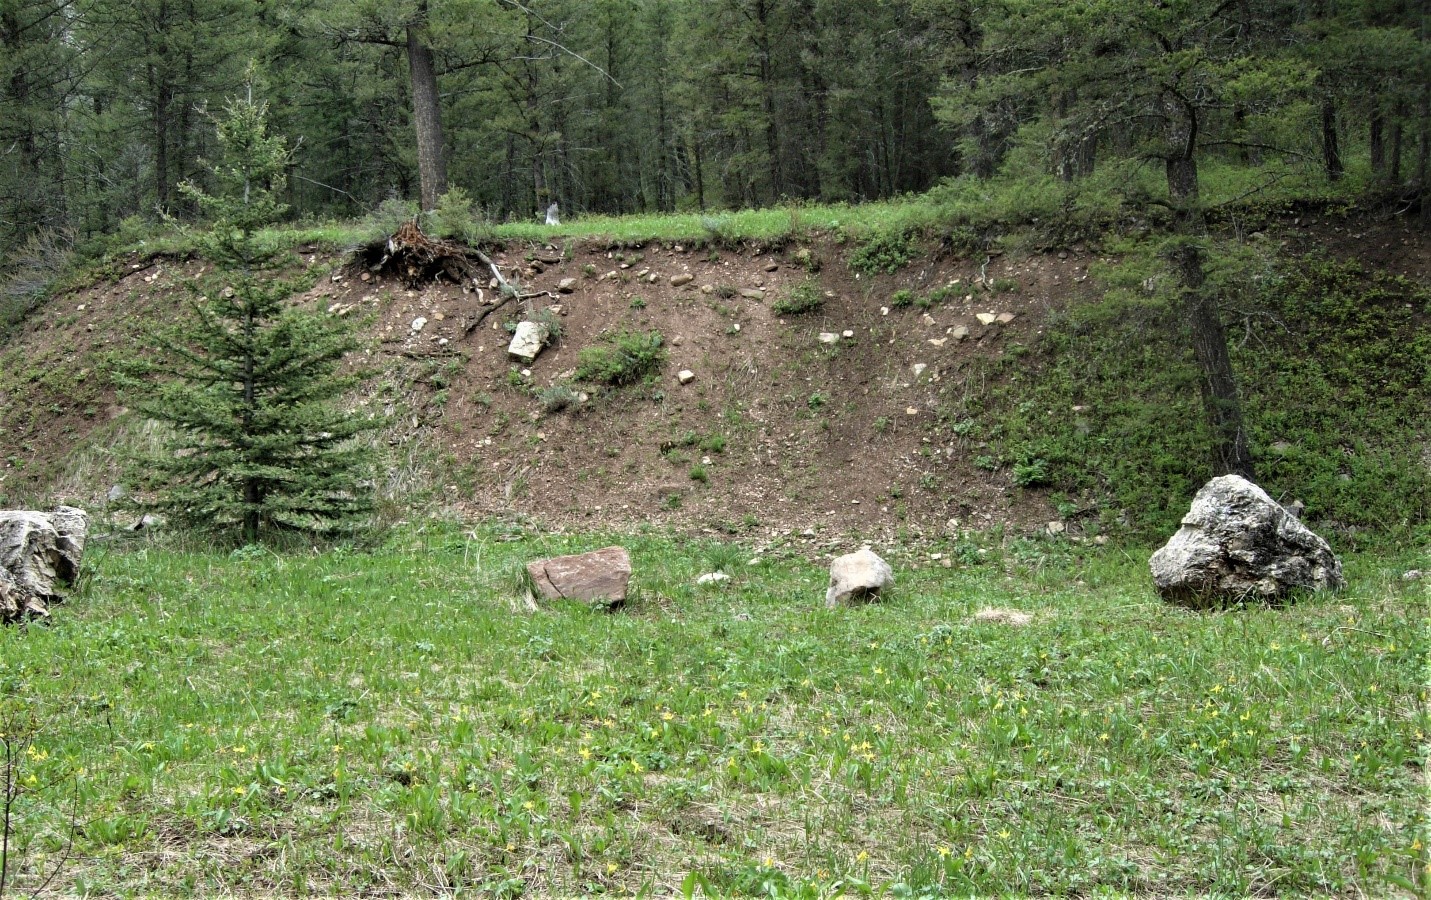 Fault scarp of the 1959 Mw 7.3 Hebgen Lake earthquake at Cabin Creek, Gallatin National Forest